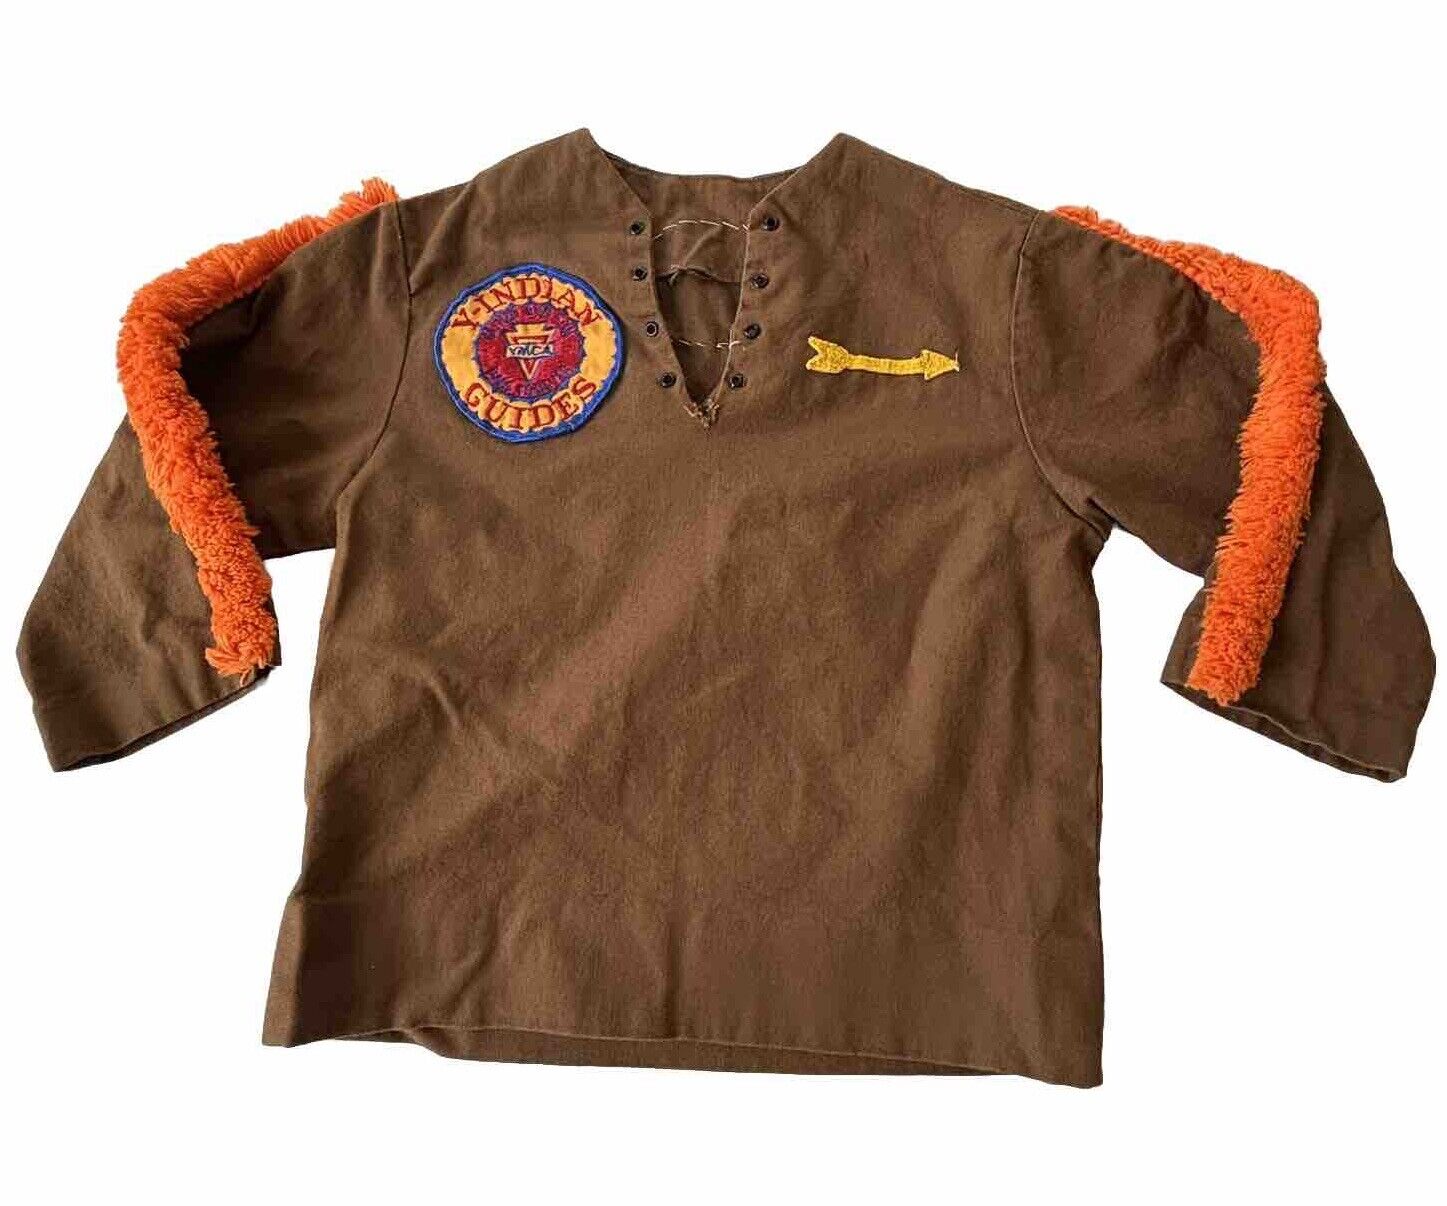 Vtg 1970s YMCA Indian Guides Shirt Youth Boys Size Approx 4 - 6x w Patches PICS